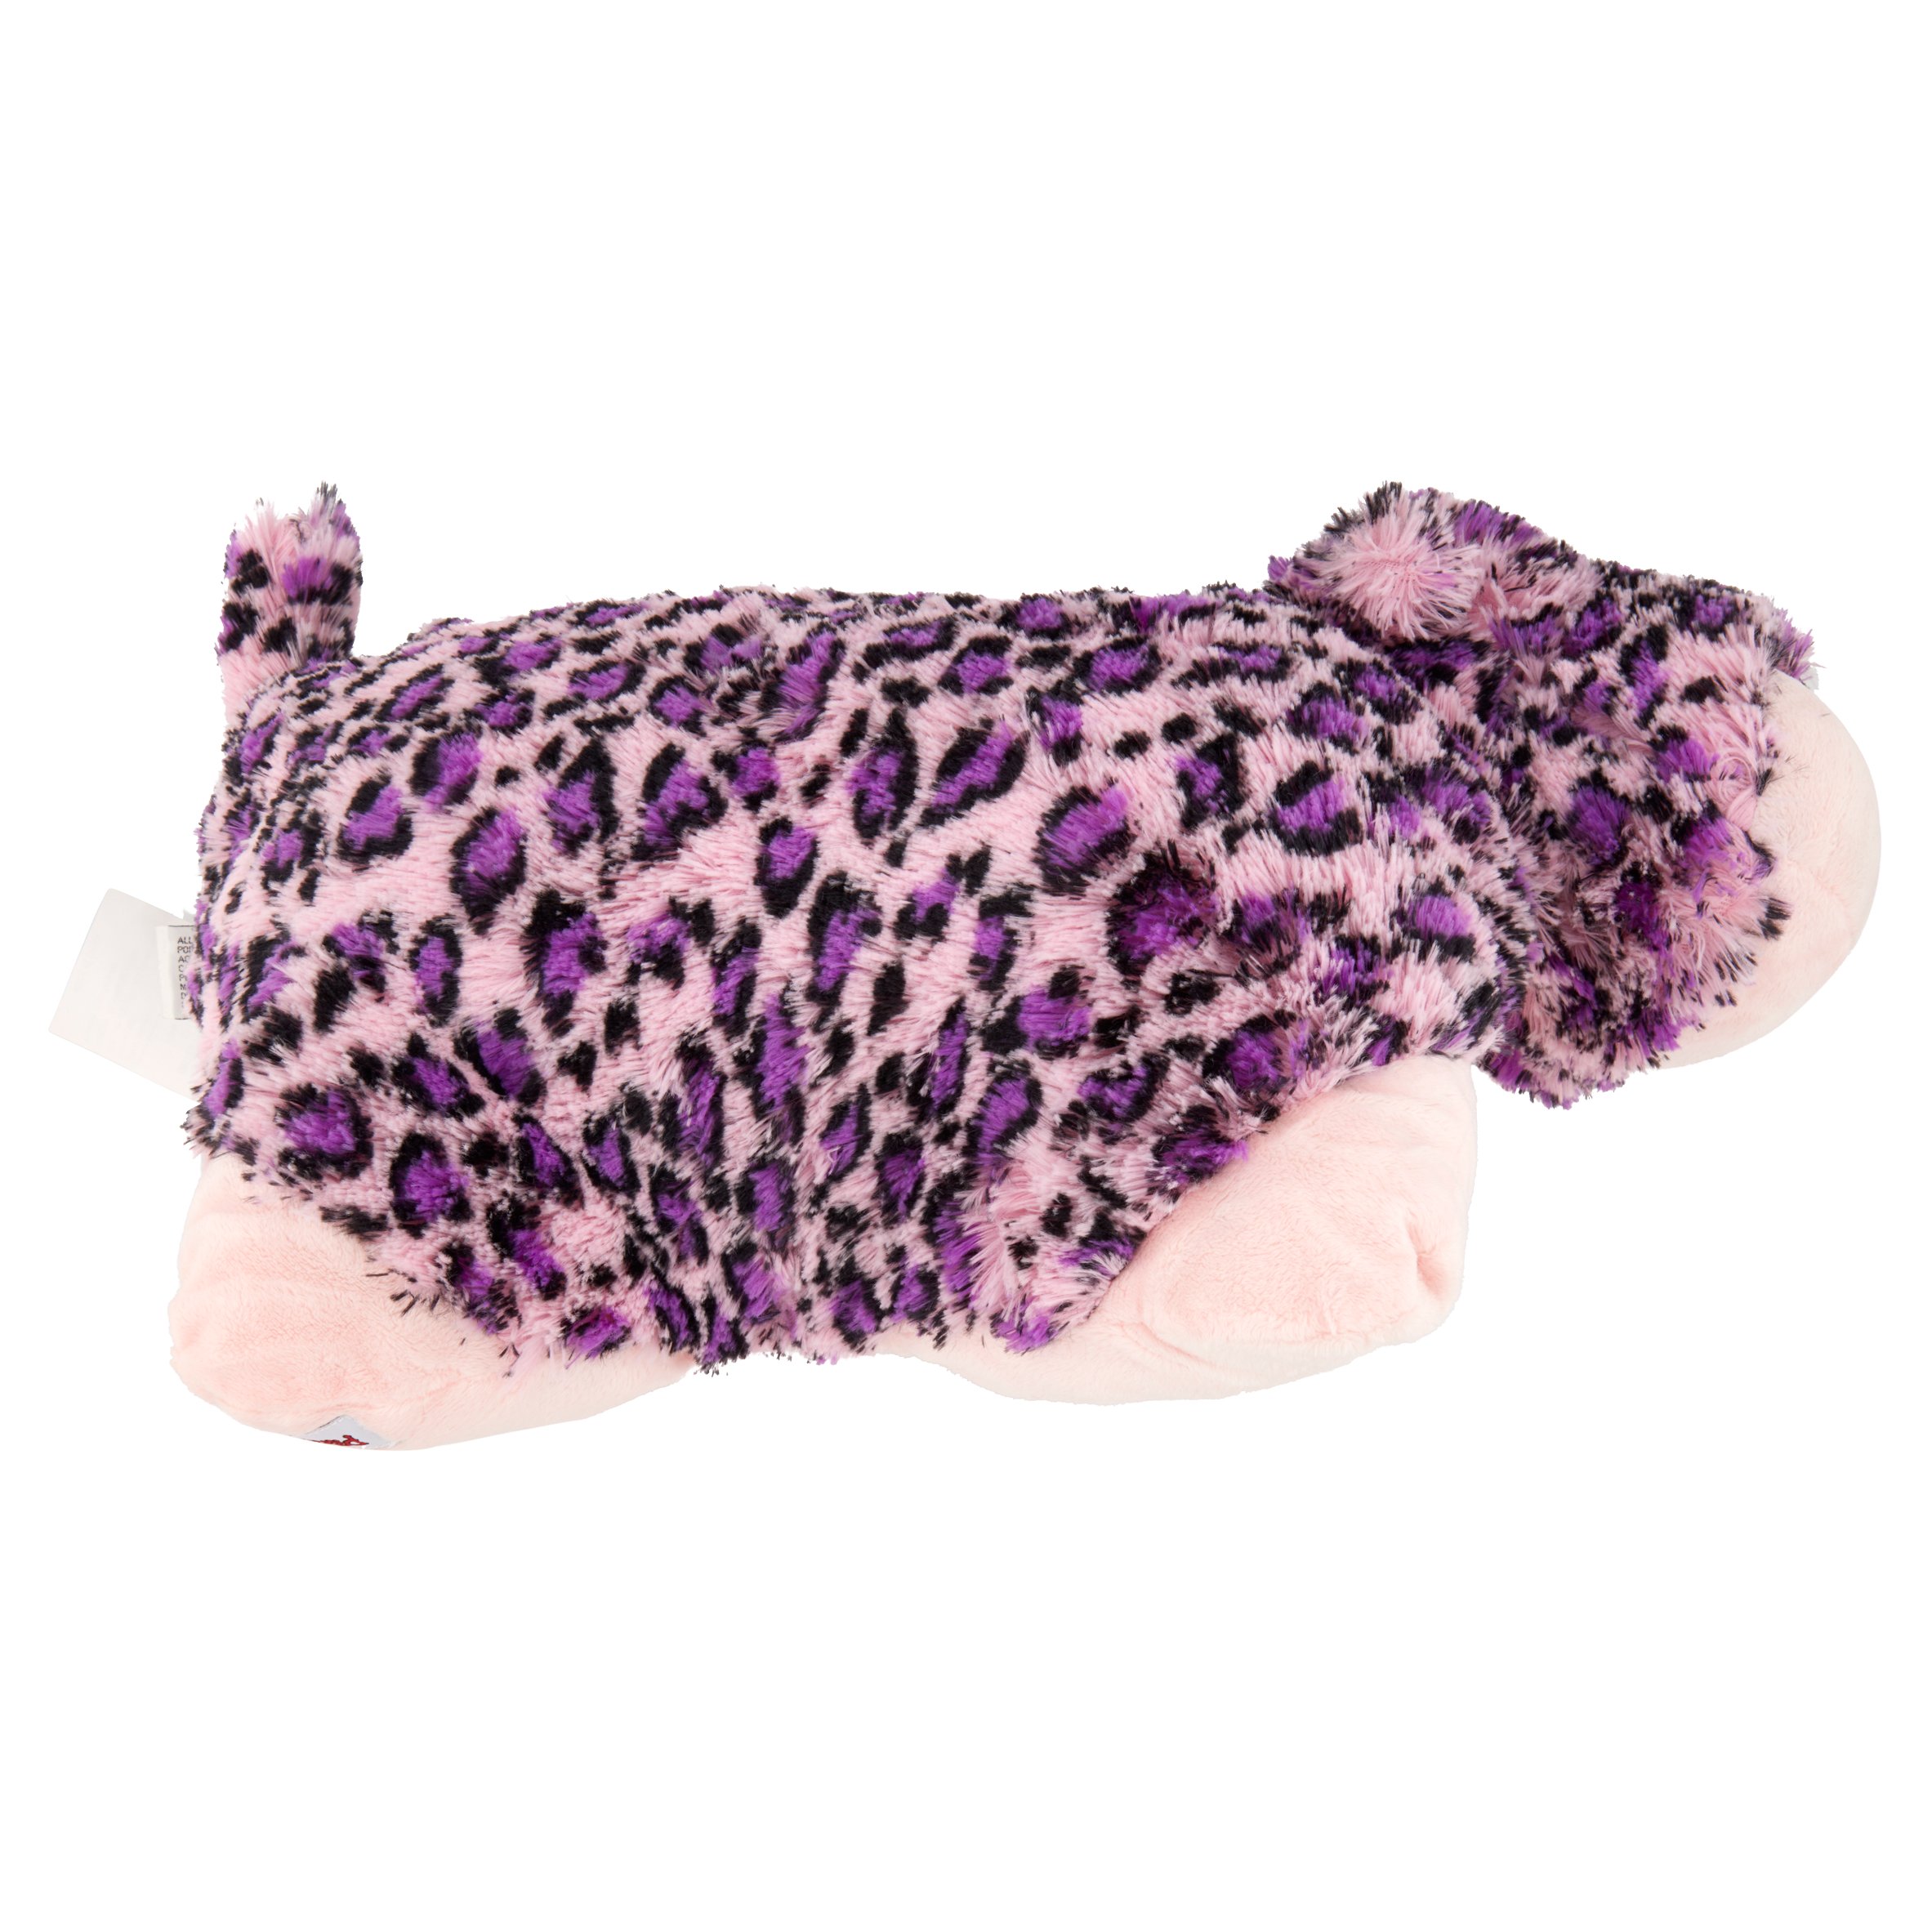 As Seen on TV Pillow Pet, Pink Leopard - image 3 of 5